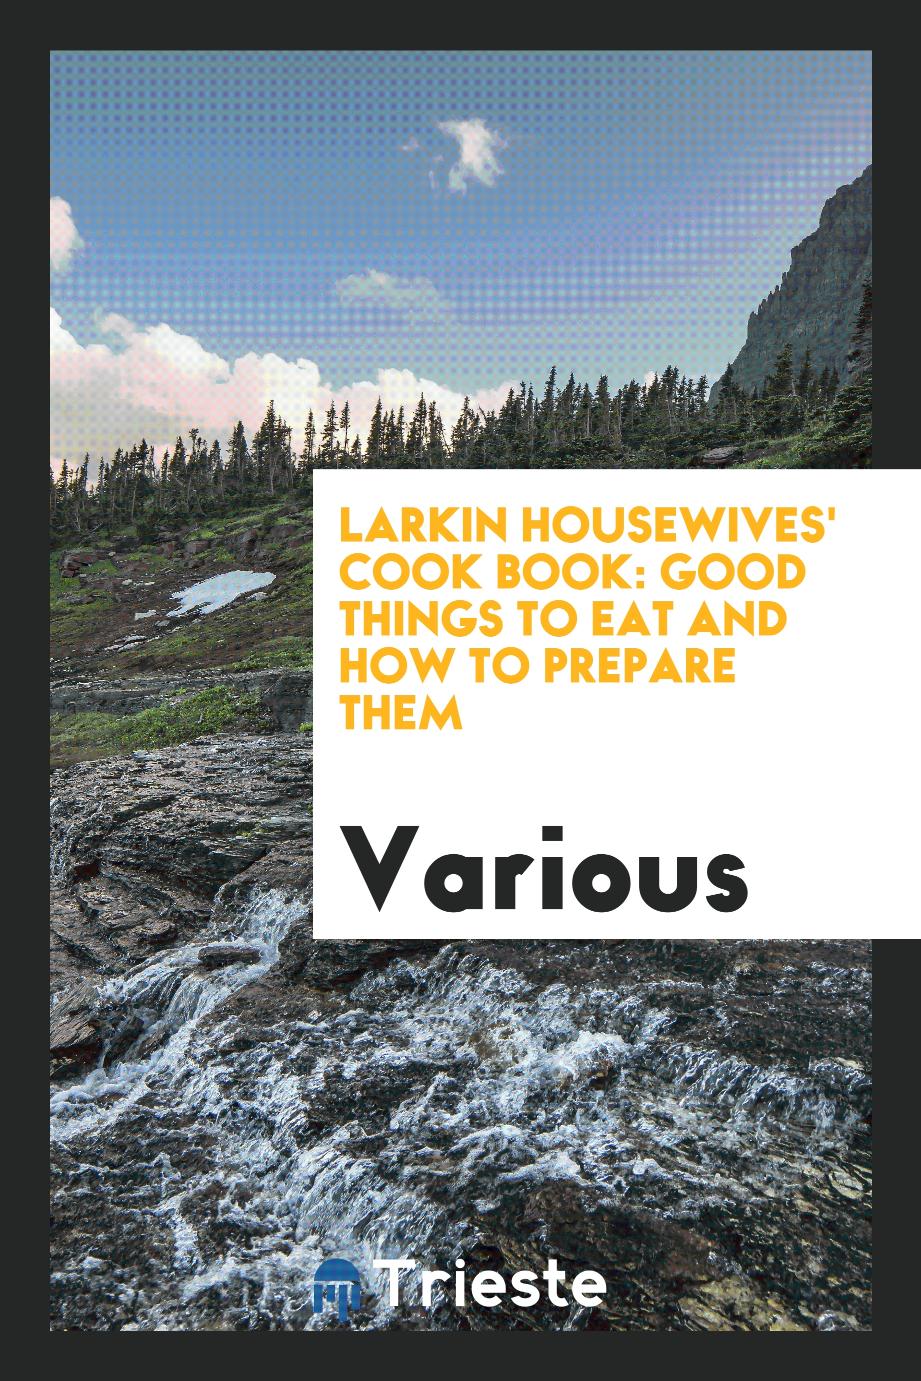 Larkin Housewives' Cook Book: Good Things to Eat and How to Prepare Them